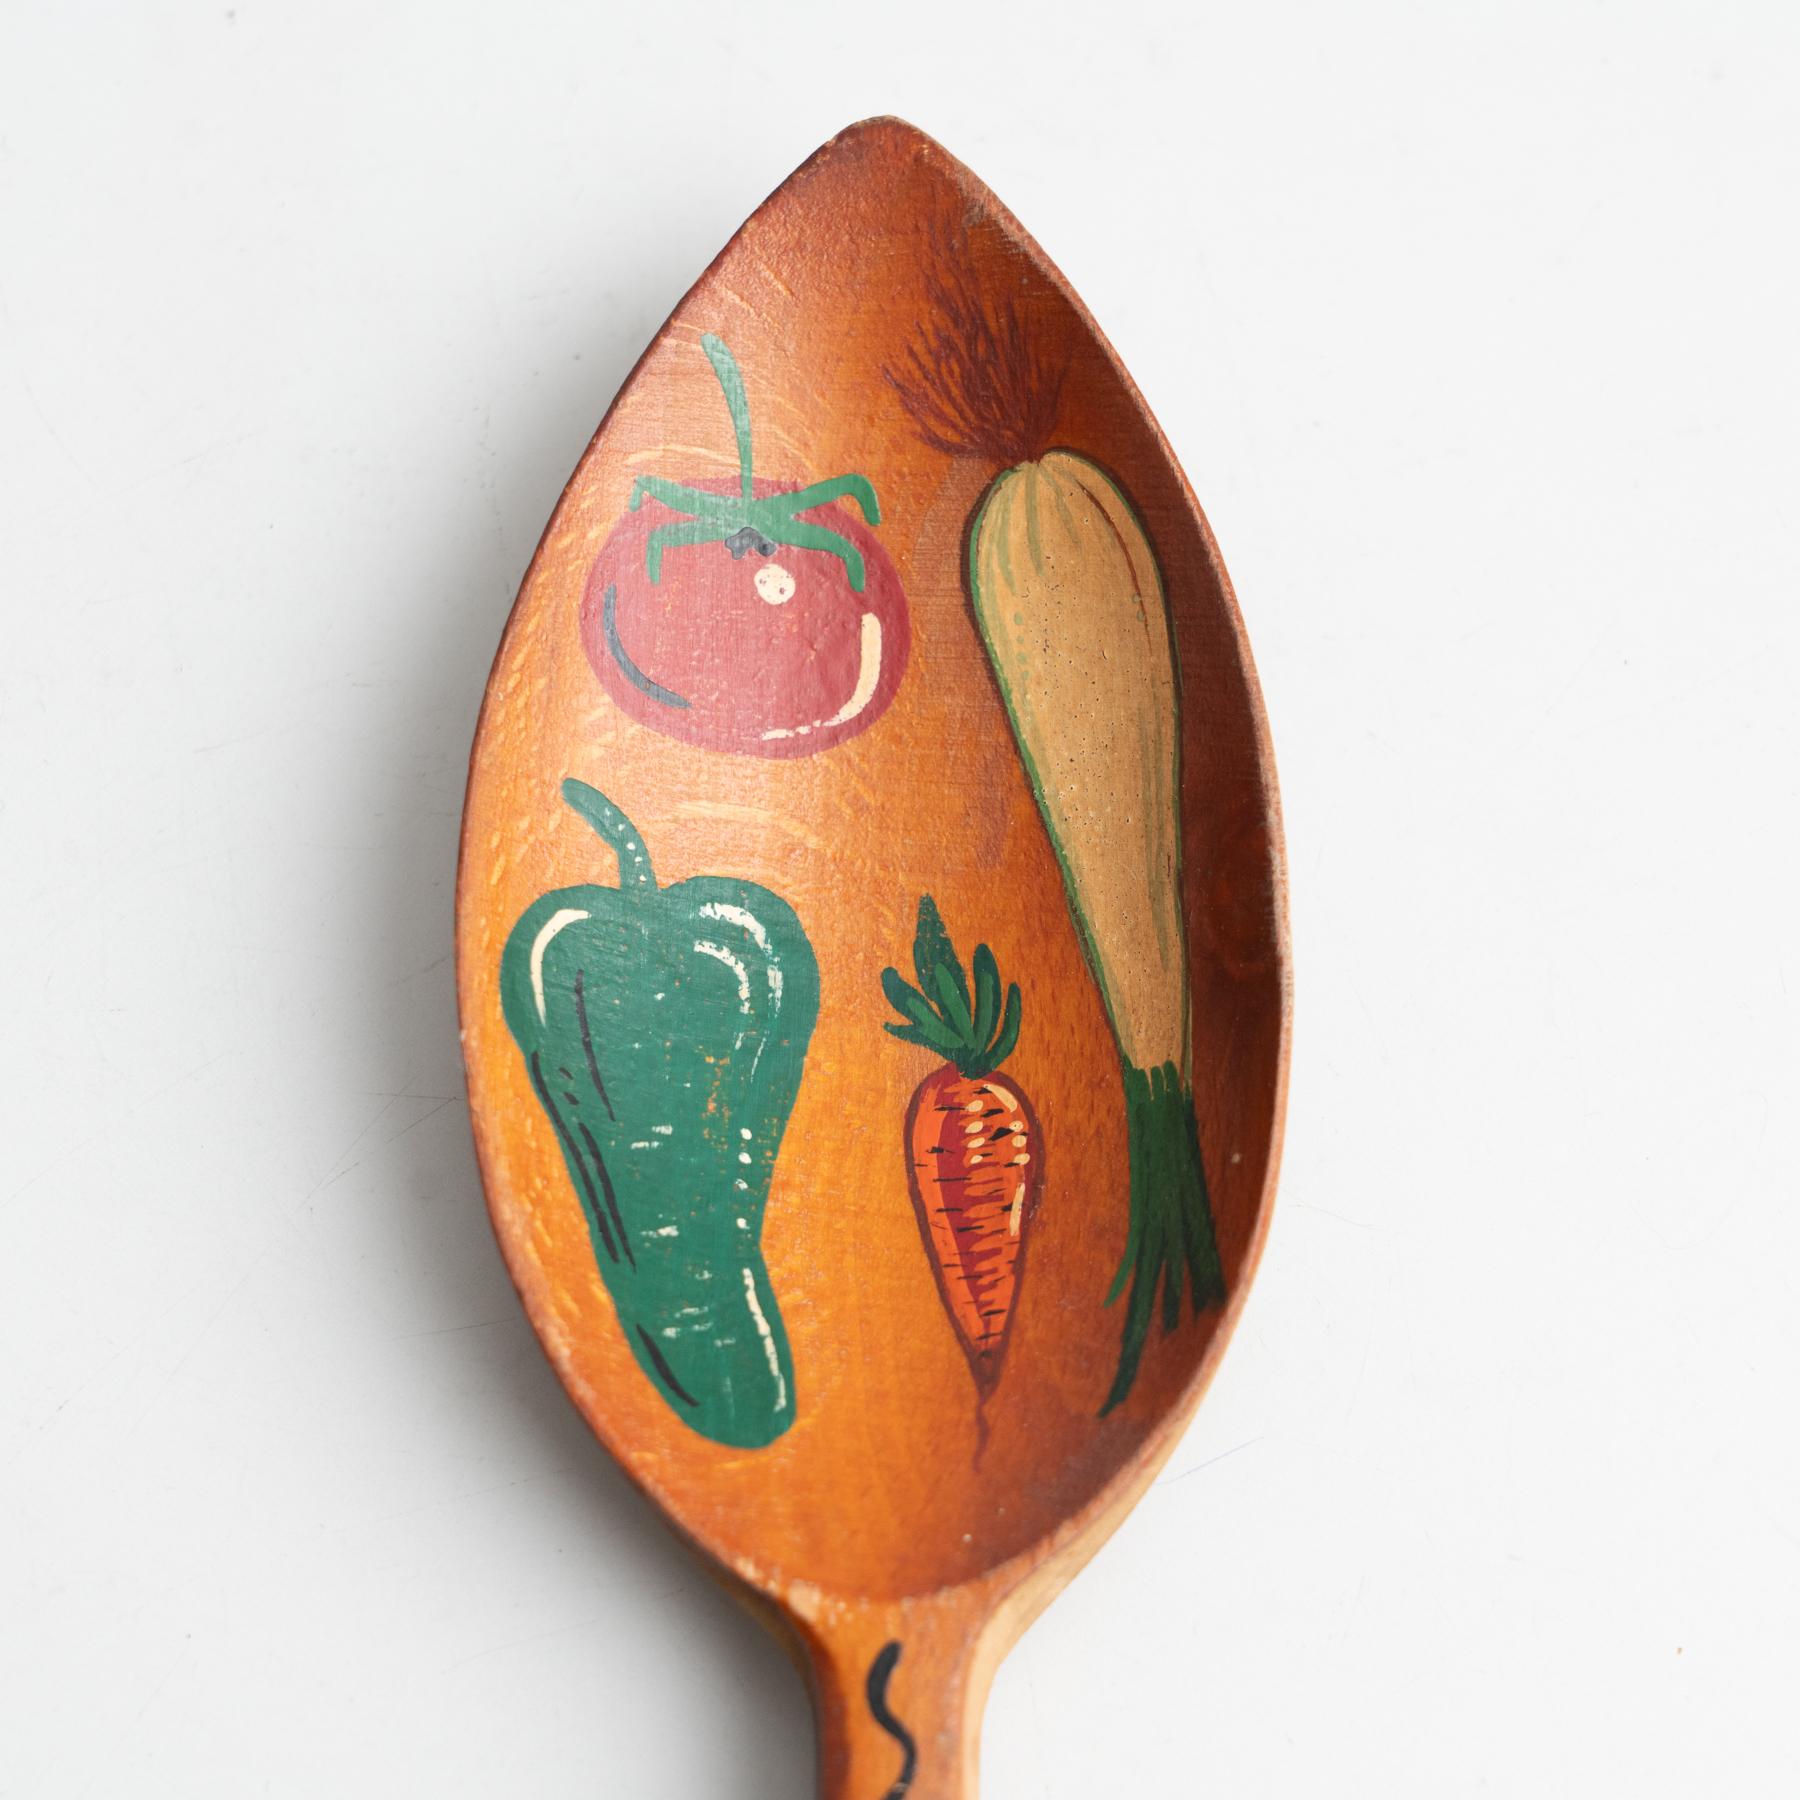 Spanish Traditional Rustic Wood Hand Painted Spoon Artwork from Spain, circa 1970 For Sale